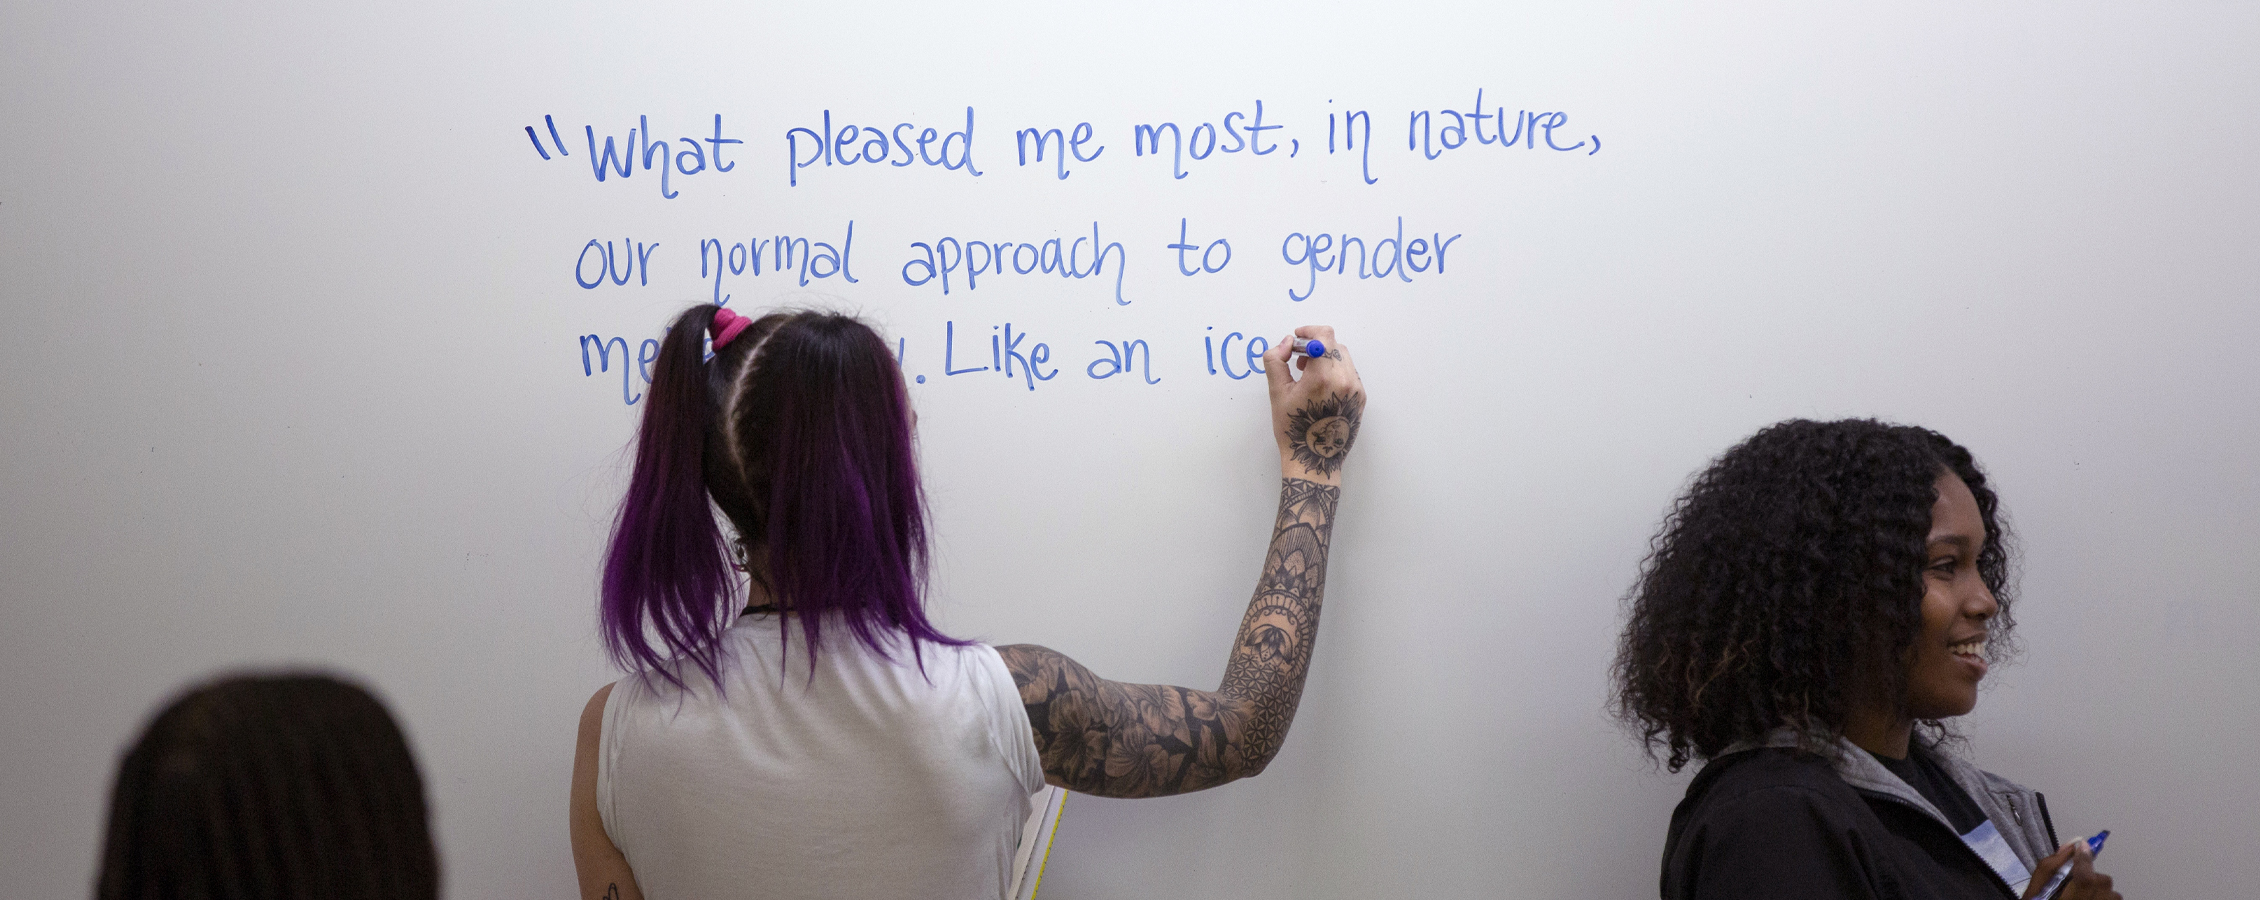 A person writes a quote on a whiteboard.